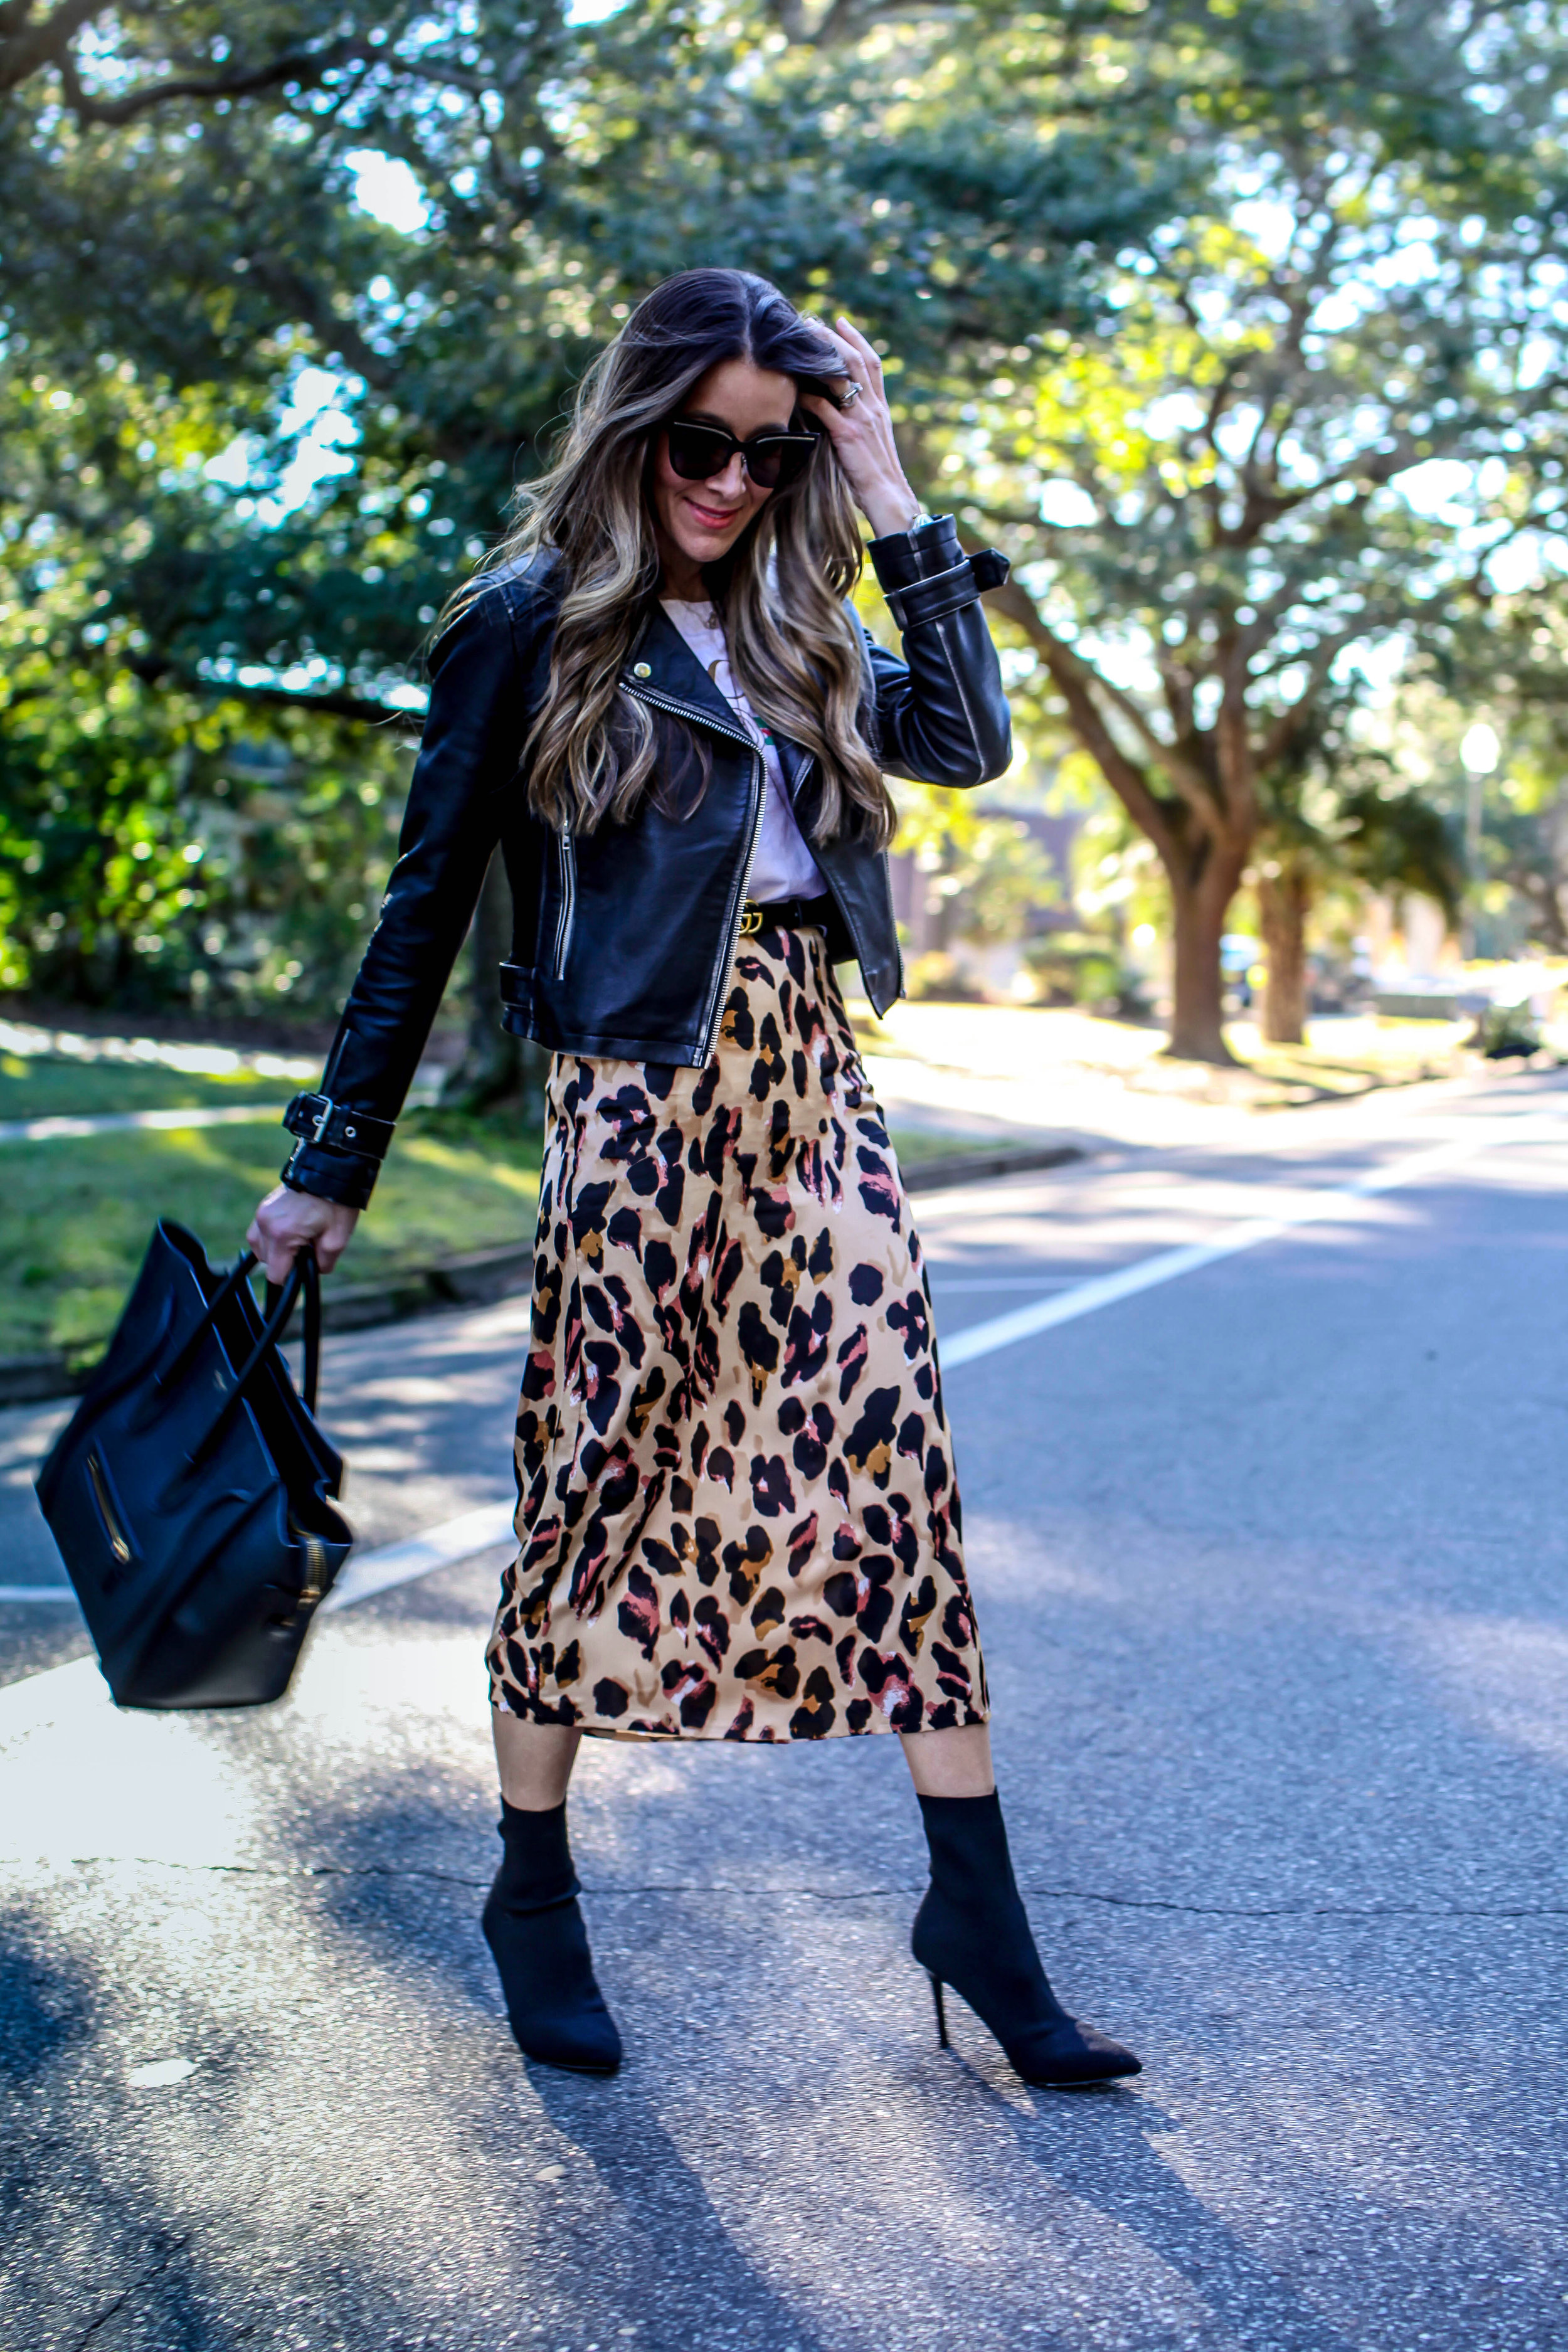  $16 AMAZON SKIRT - LEOPARD - OTHER COLORS HERE AND HERE | FAUX LEATHER JACKET - TOPSHOP - SIMILAR HERE AND HERE | GUCCI TEE - ORIGINAL HERE OR $13 DUPE VERSION HERE | HANDBAG - CELINE - DUPE VERSION HERE | BOOTIES - STEVE MADDEN | SUNGLASSES - SIMILAR HERE | $6 DOLLAR NECKLACE SET - HERE AND HERE 